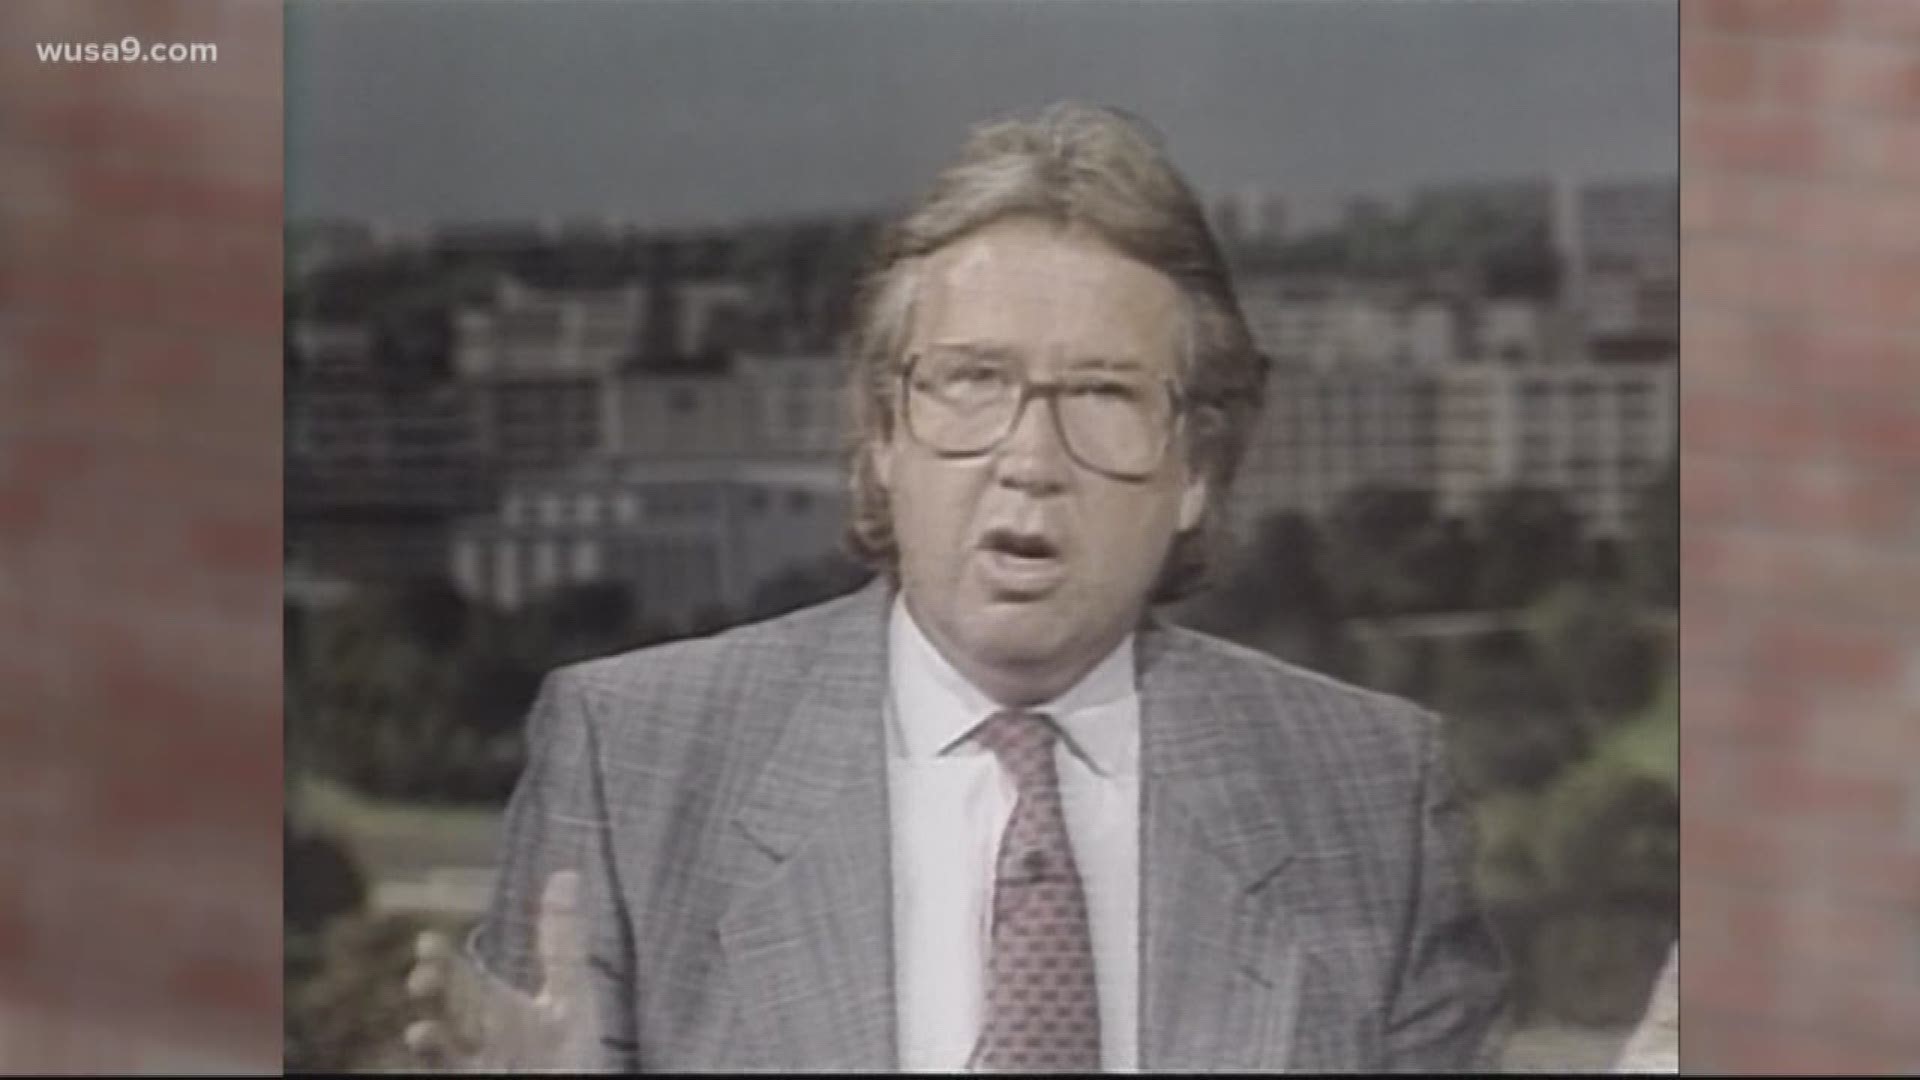 The iconic Channel 9 sportscaster was easily the most popular and highest paid local TV figure this town had ever seen. Bruce takes a look back and his best moments